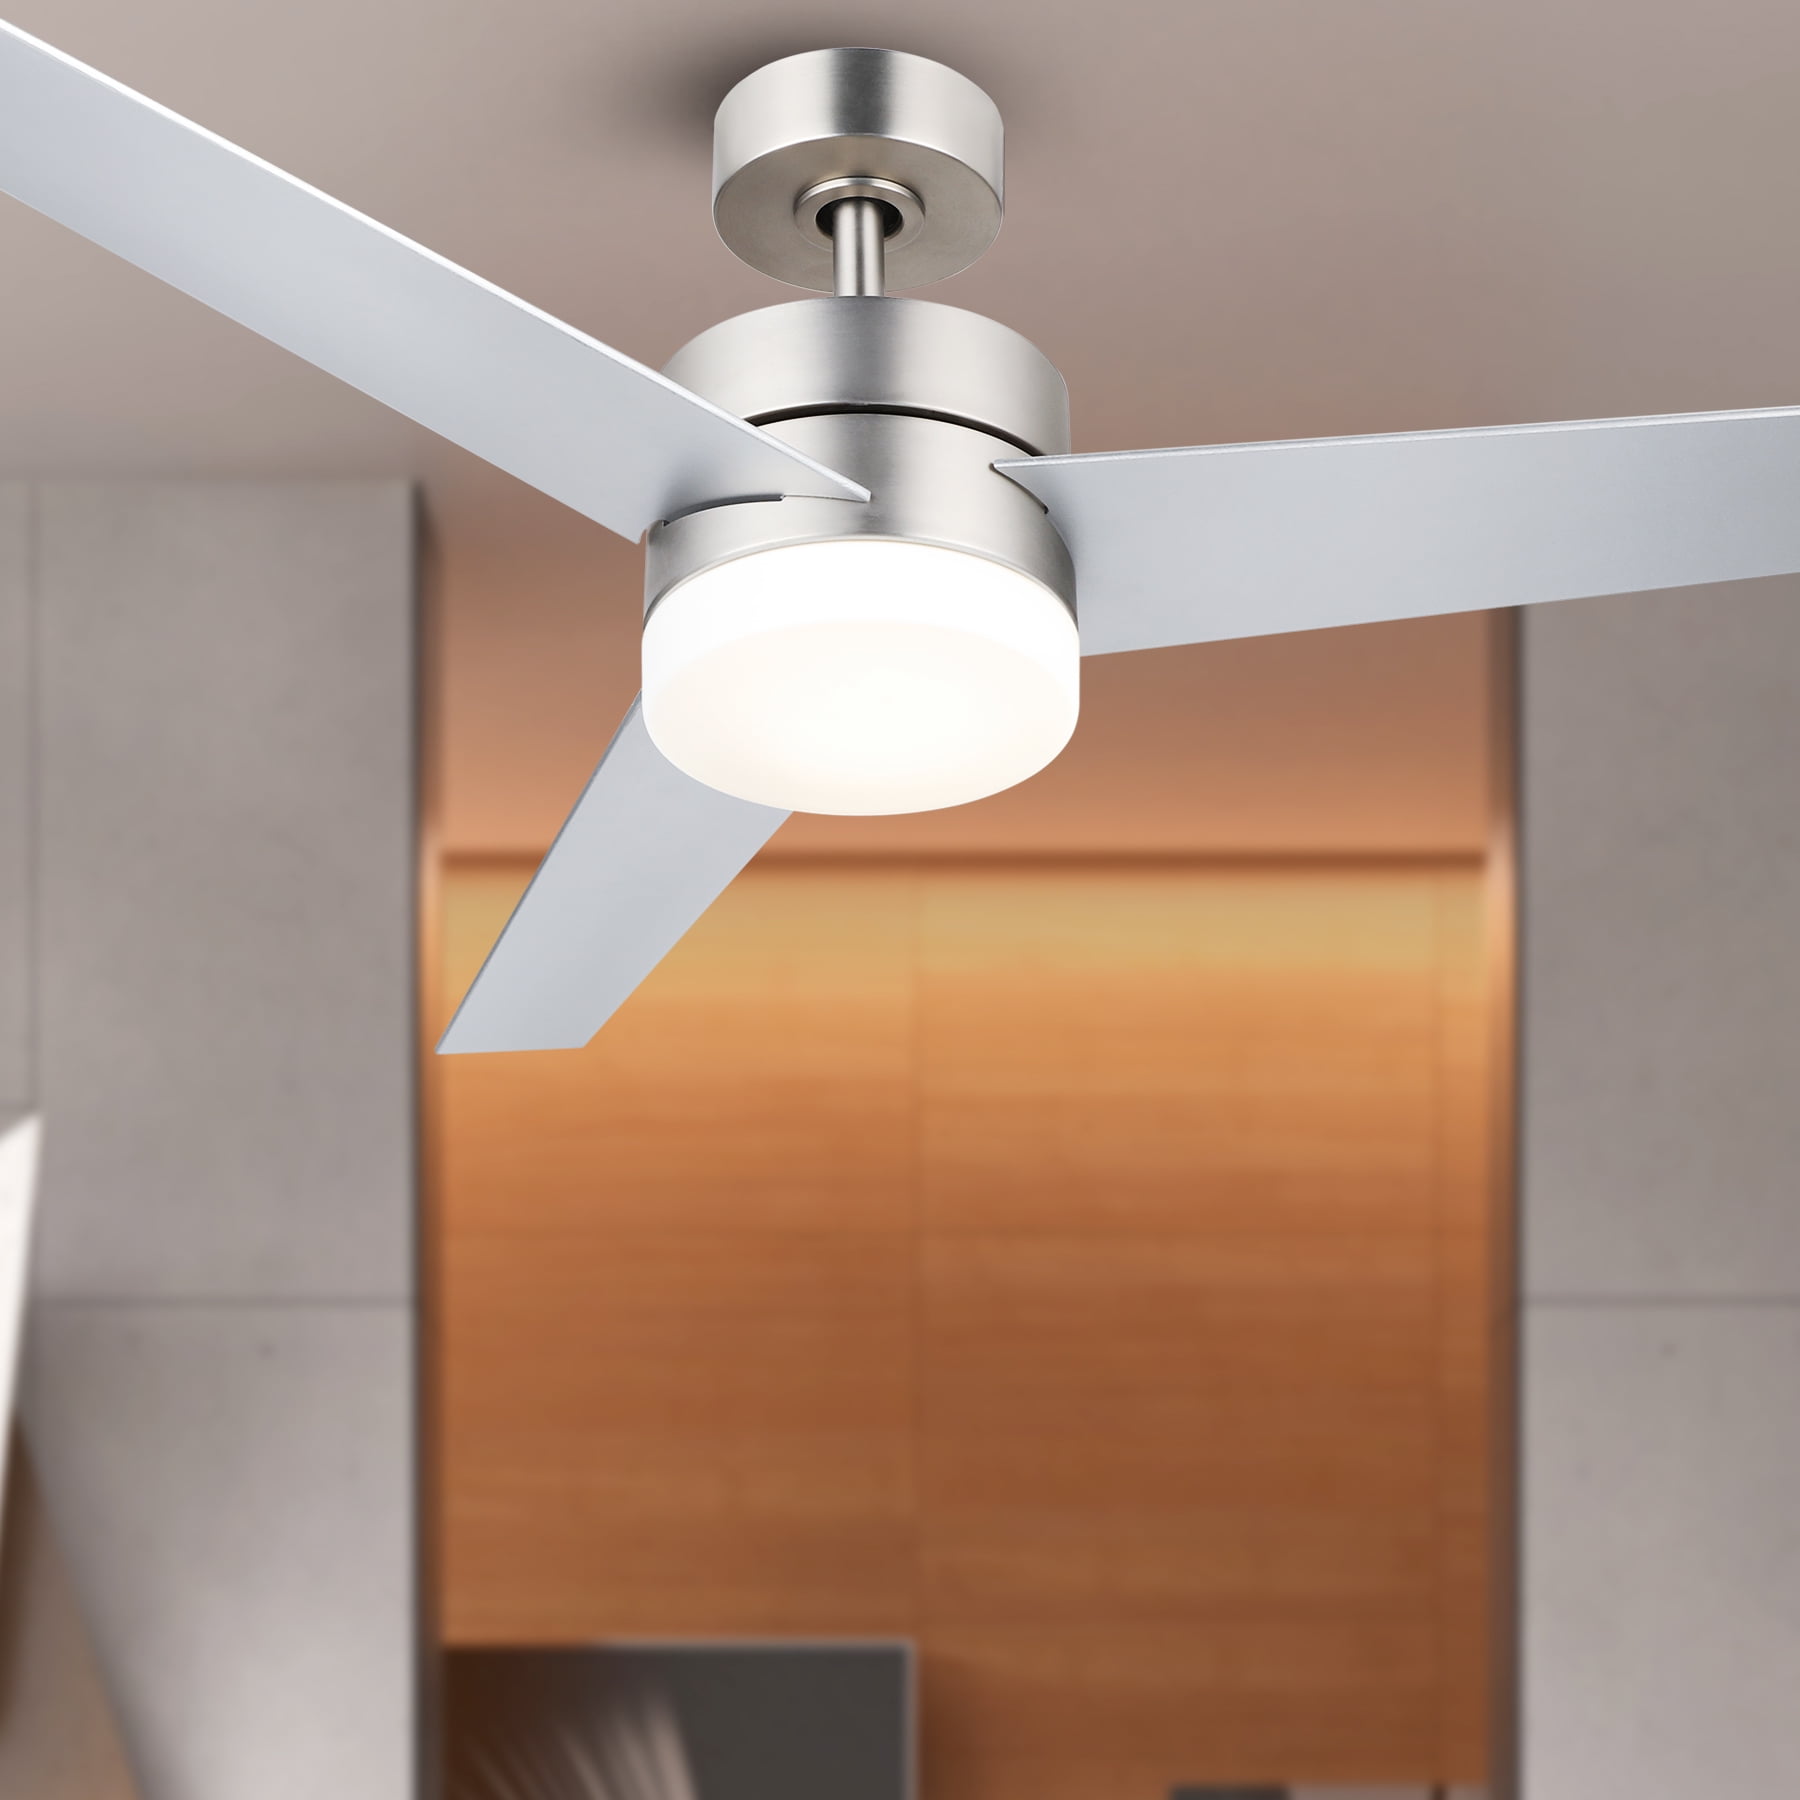 52” Ceiling Fan Light with 15W LED and Remote Control UL Listed Solid Wood 